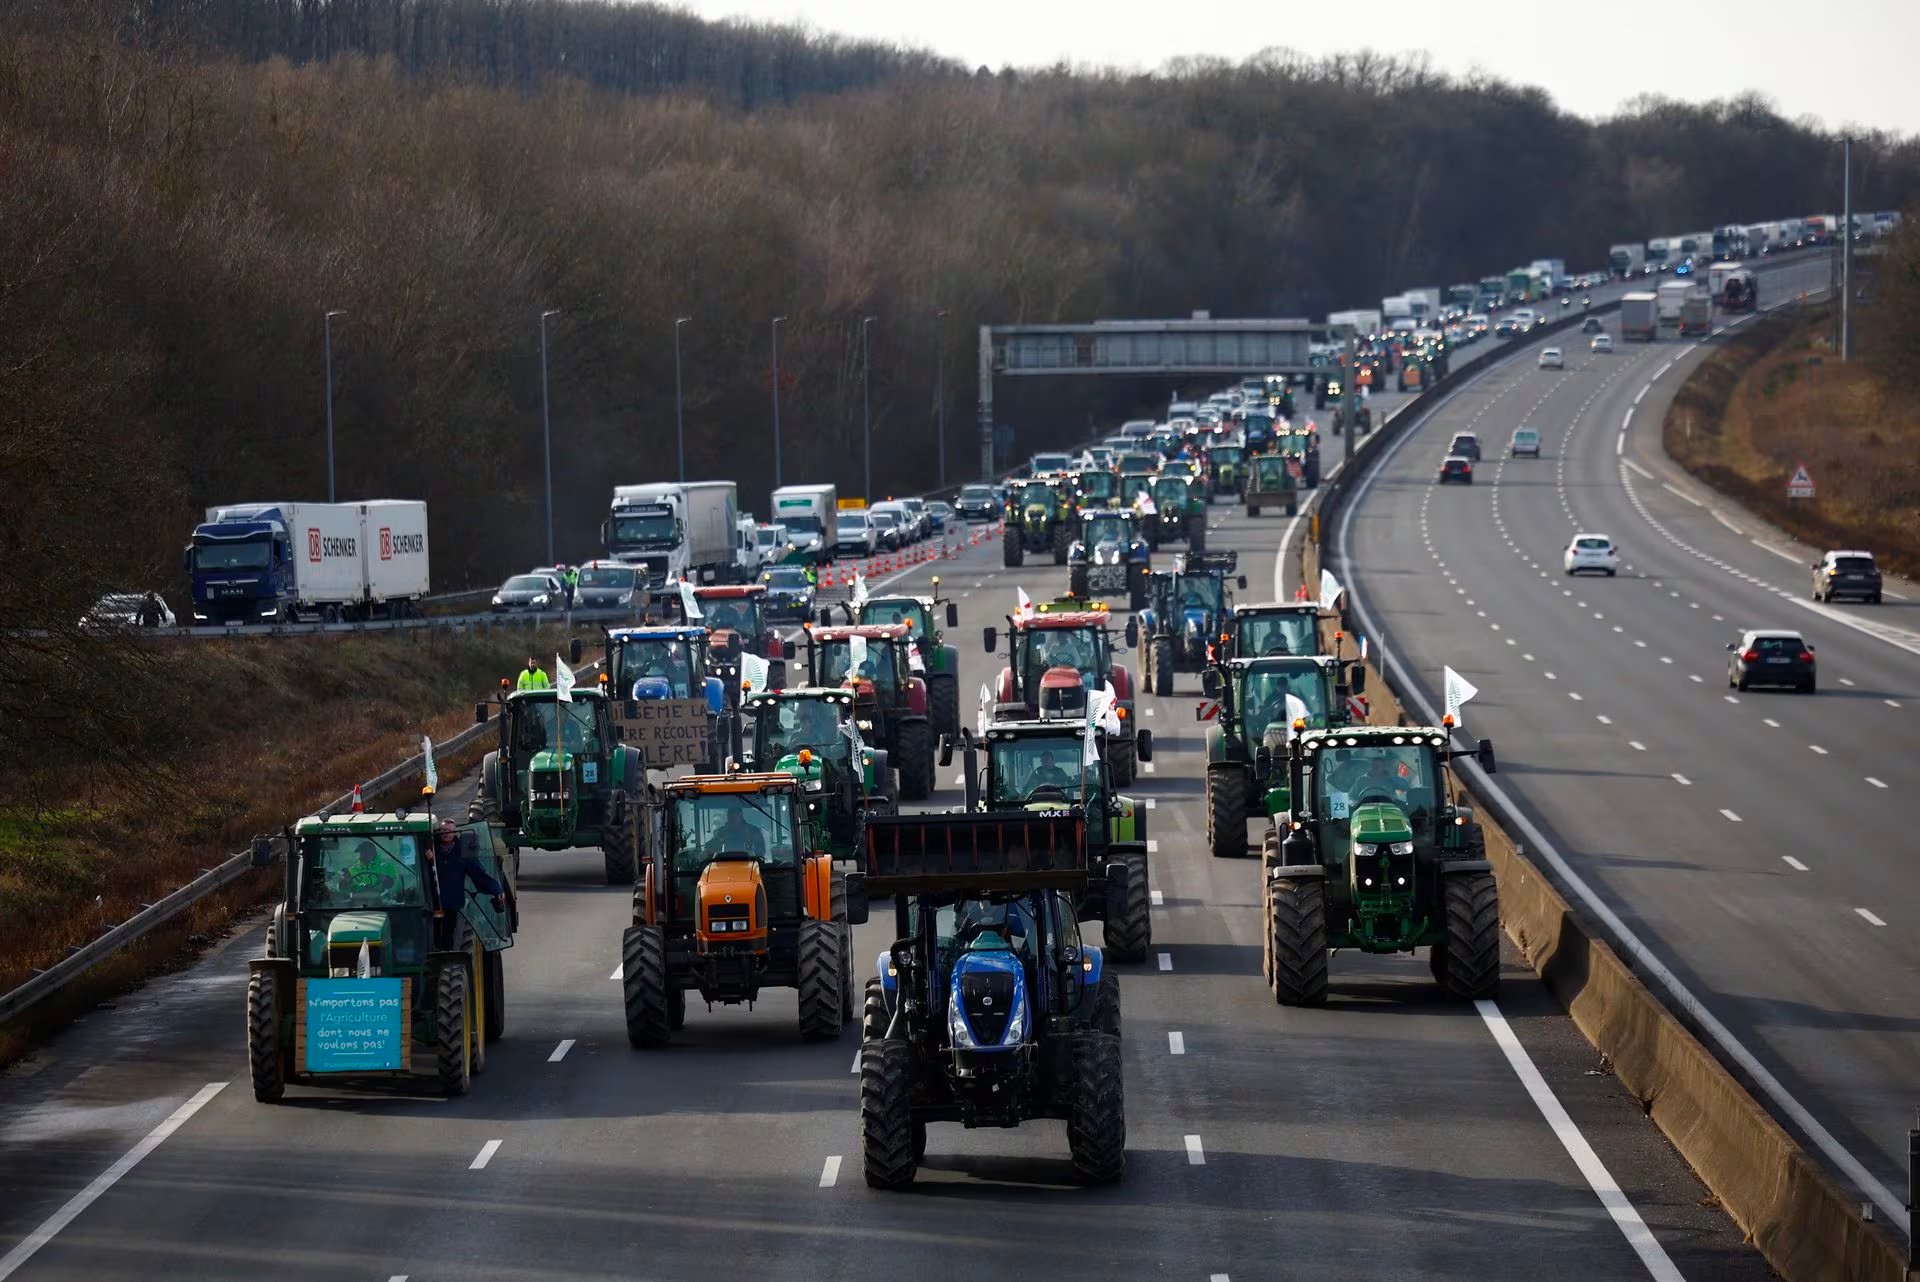 French farmers drive their tractors on a highway as they protest over price pressures, taxes and green regulation, grievances shared by farmers across Europe, in Longvilliers, near Paris, France, January 29. Photo: Reuters